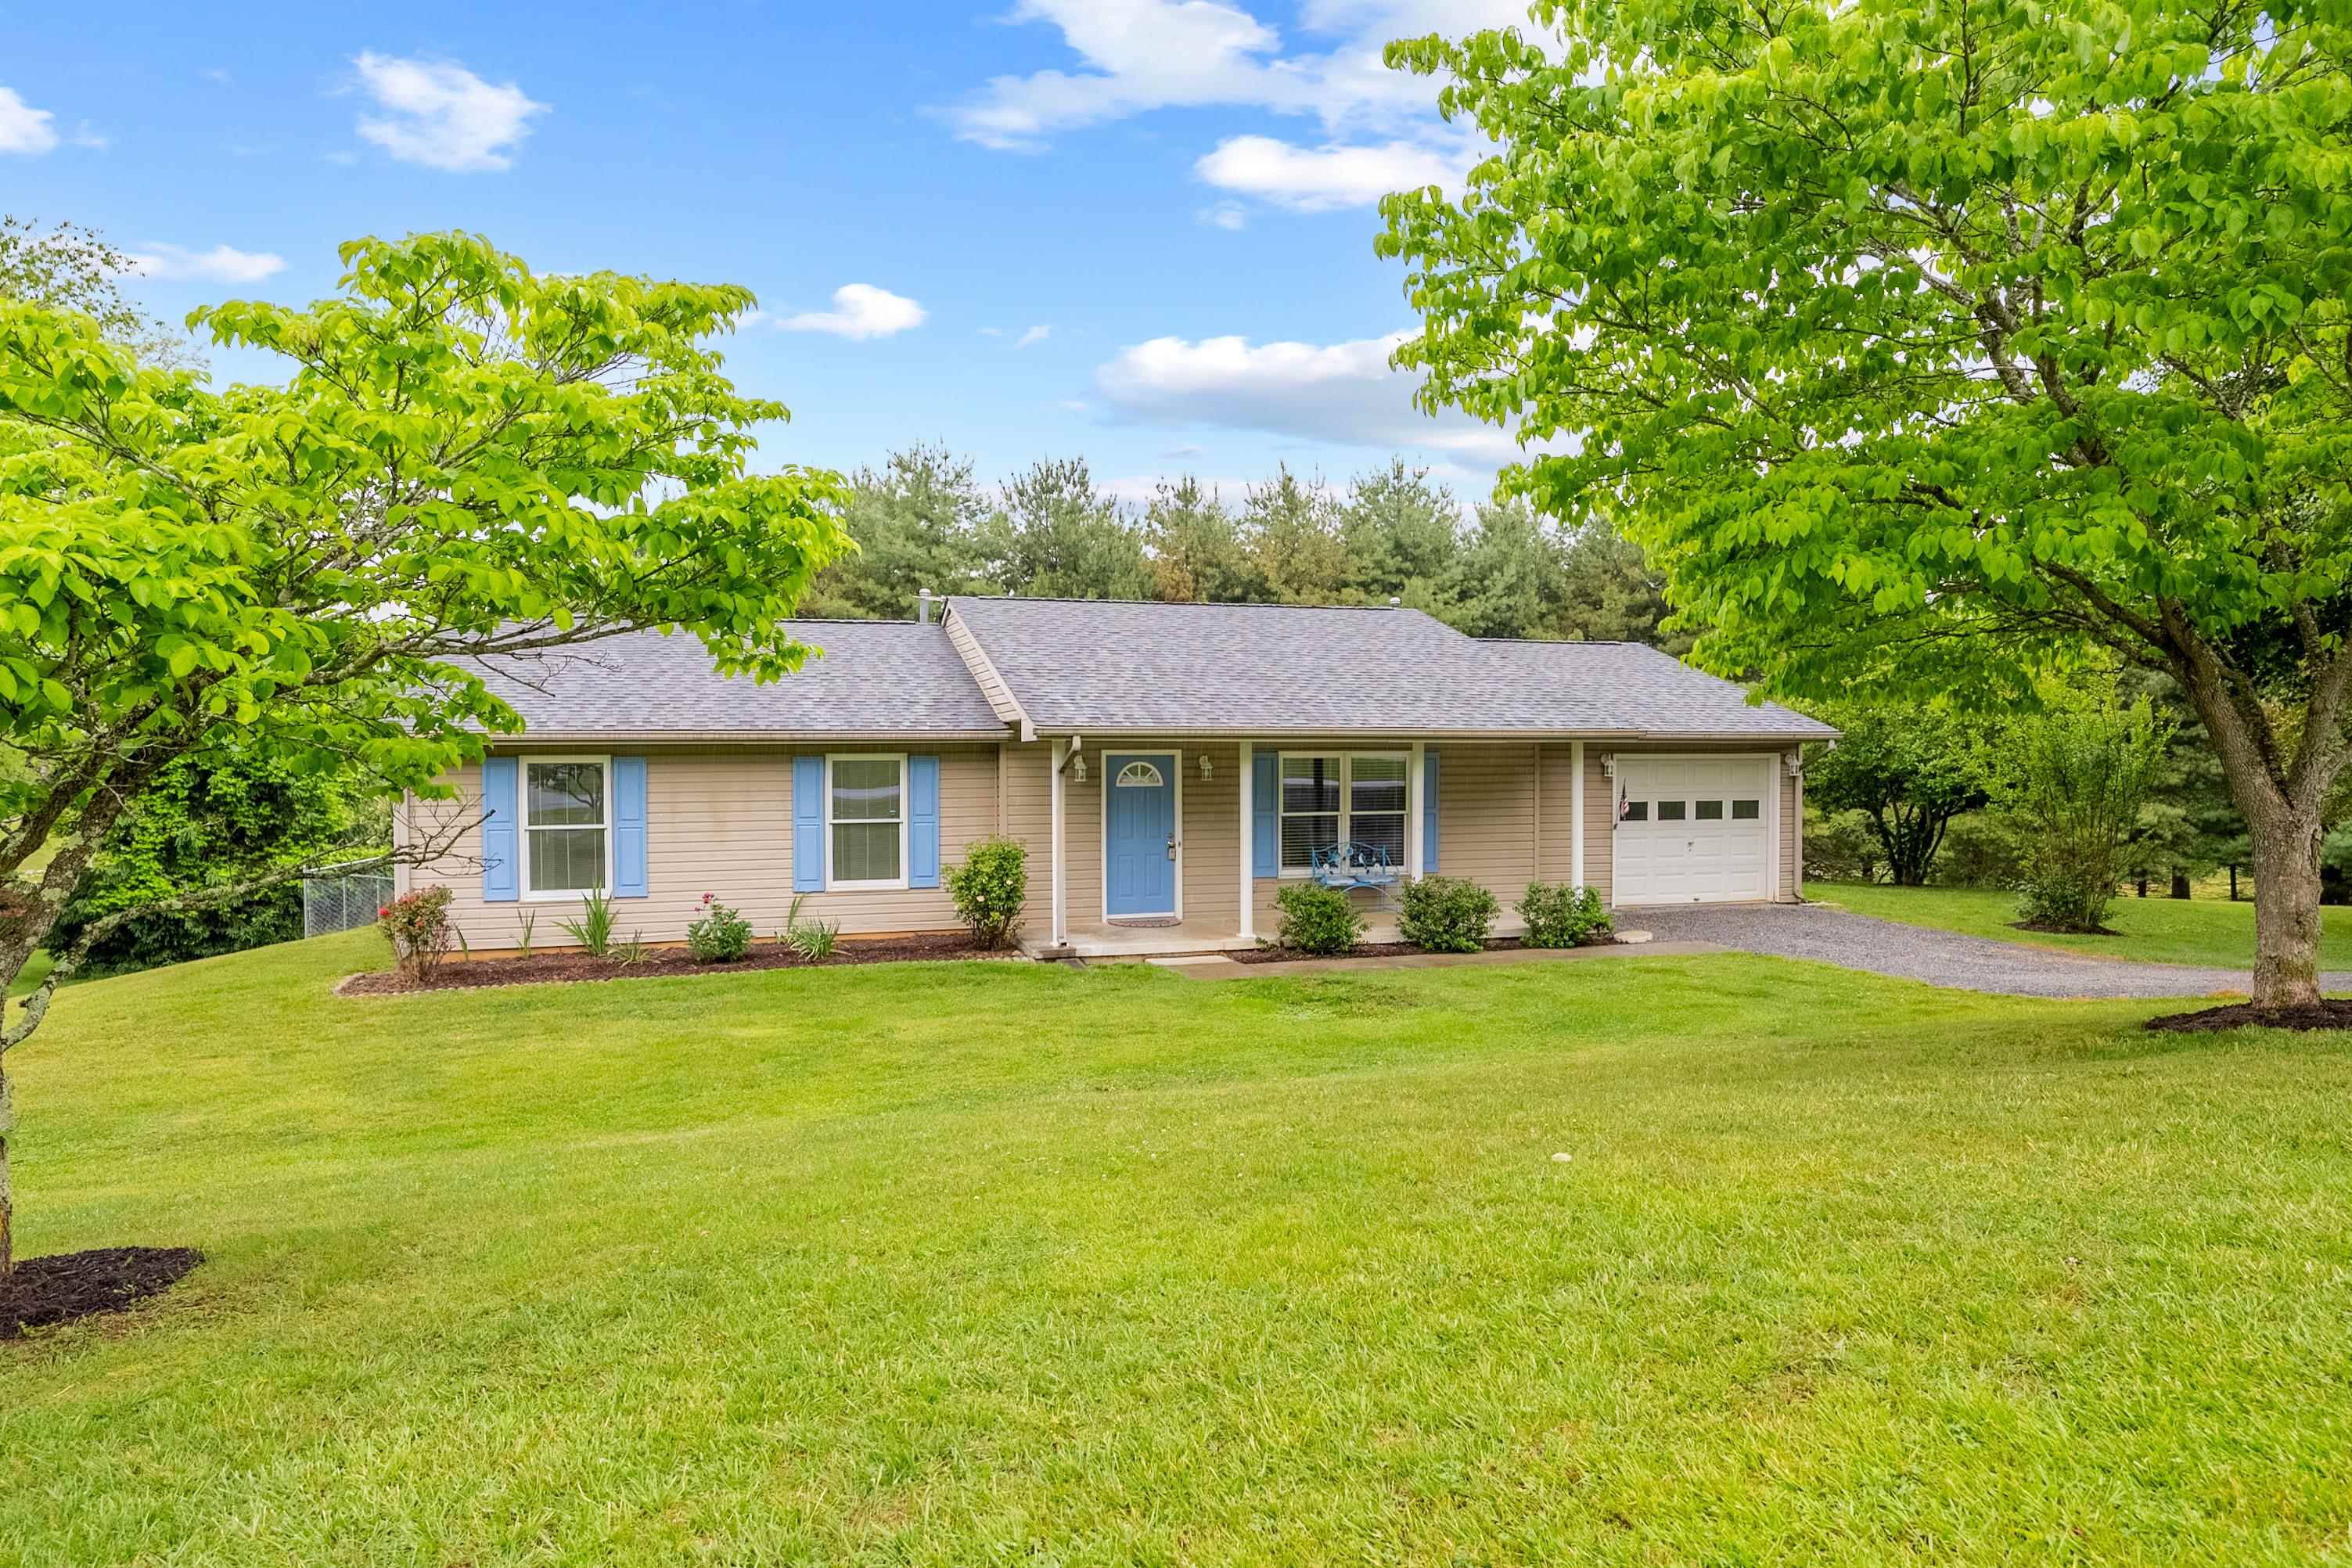 Come home to Cameo Lane in Blacksburg perfectly situated on over a half acre flat lot that is partially fenced.  Enjoy a quiet cul-de-sac street with pastoral views and nice rural neighborhood setting less than 10 minutes to downtown Blacksburg and quick commute to VT.  There is plenty to enjoy inside this charming one level ranch home boasting 3 bedrooms, 2 full baths, new flooring and fresh paint.  Garage offers convenience directly into the home.  Come See and finally have room to breathe within a short drive to the conveniences of Blacksburg!